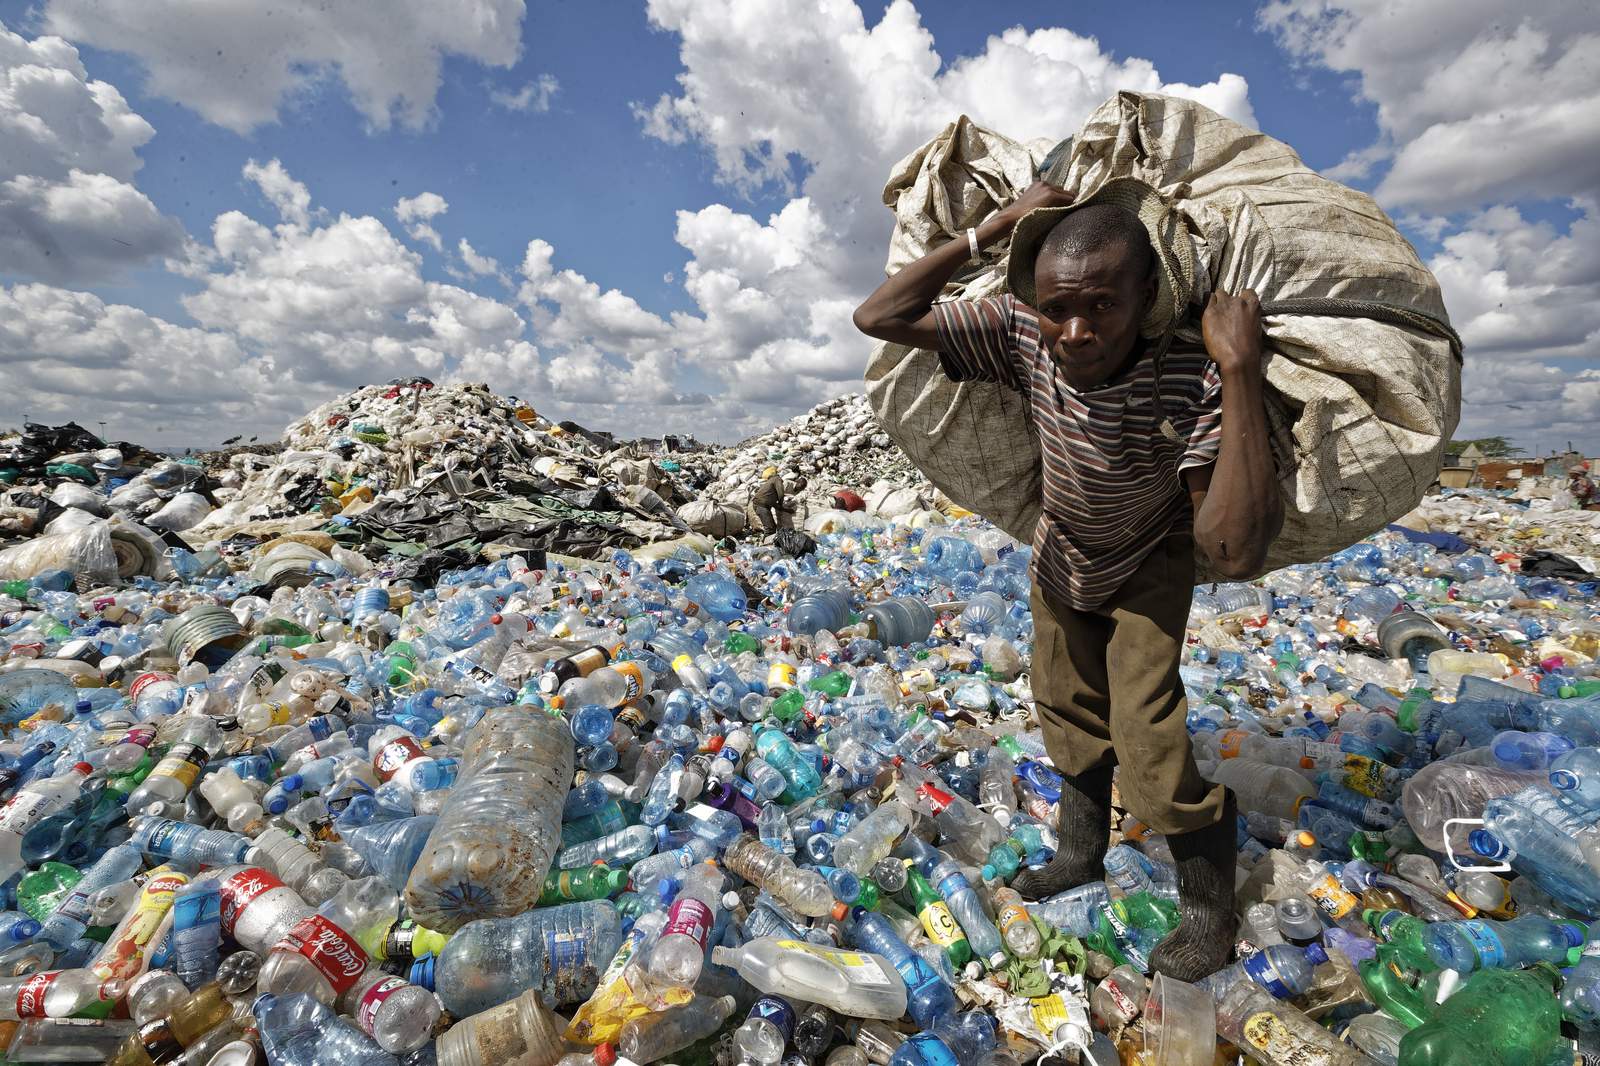 Oil companies accused of wanting to dump plastics in Africa